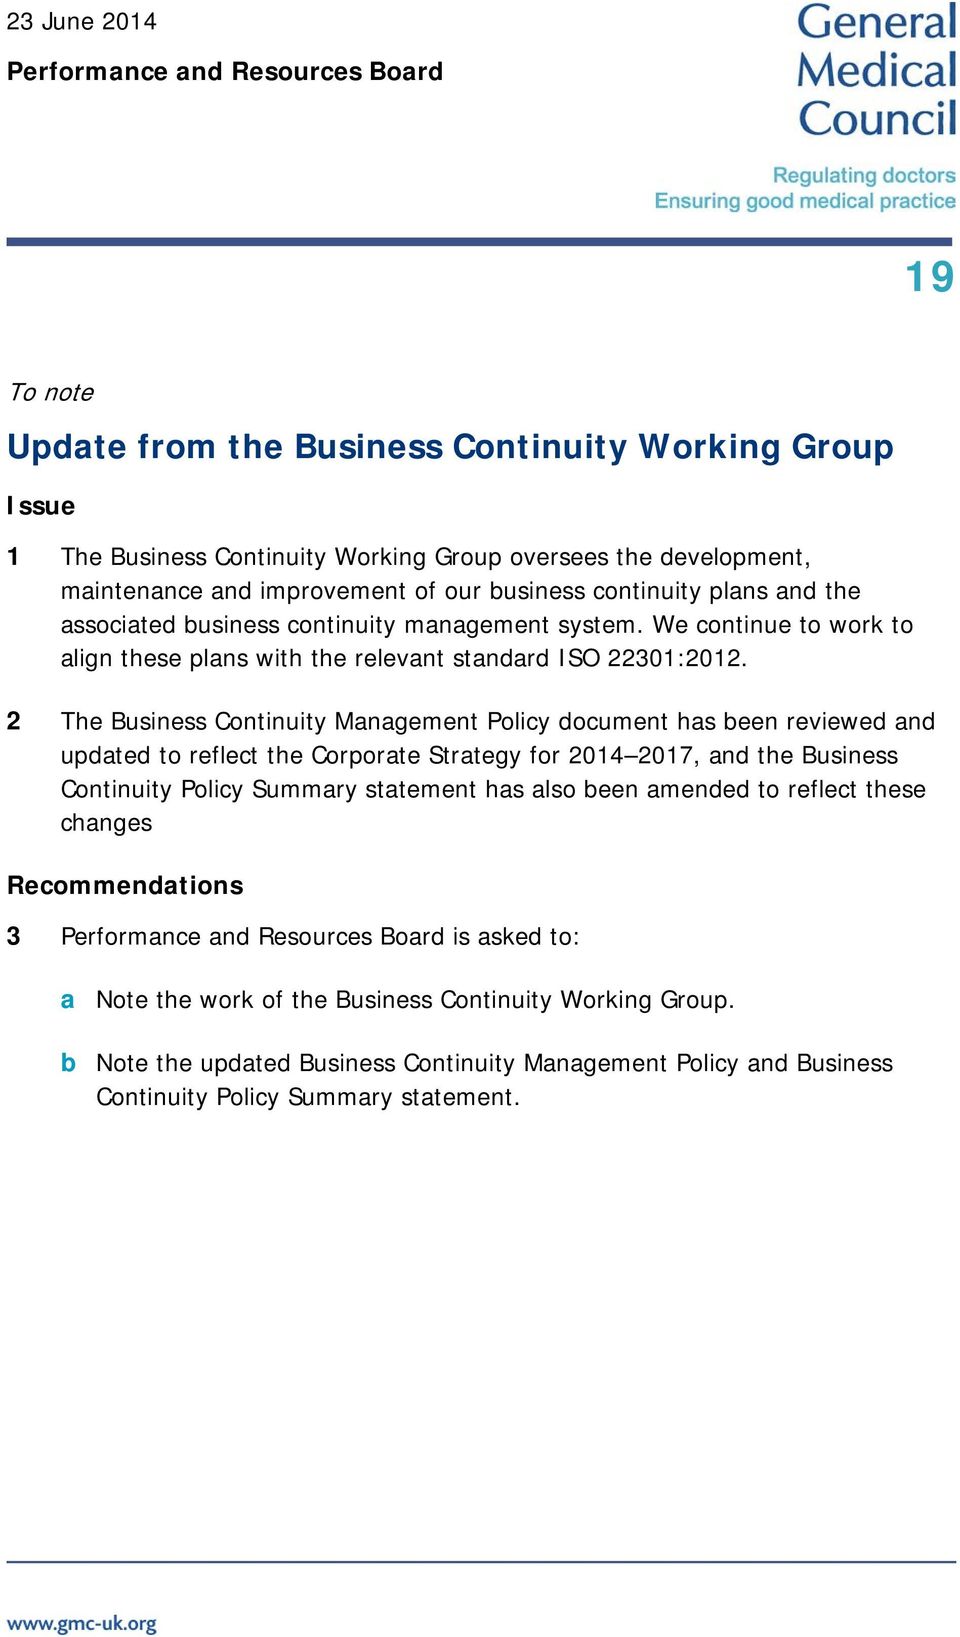 2 The Business Continuity Management Policy document has been reviewed and updated to reflect the Corporate Strategy for 2014 2017, and the Business Continuity Policy Summary statement has also been